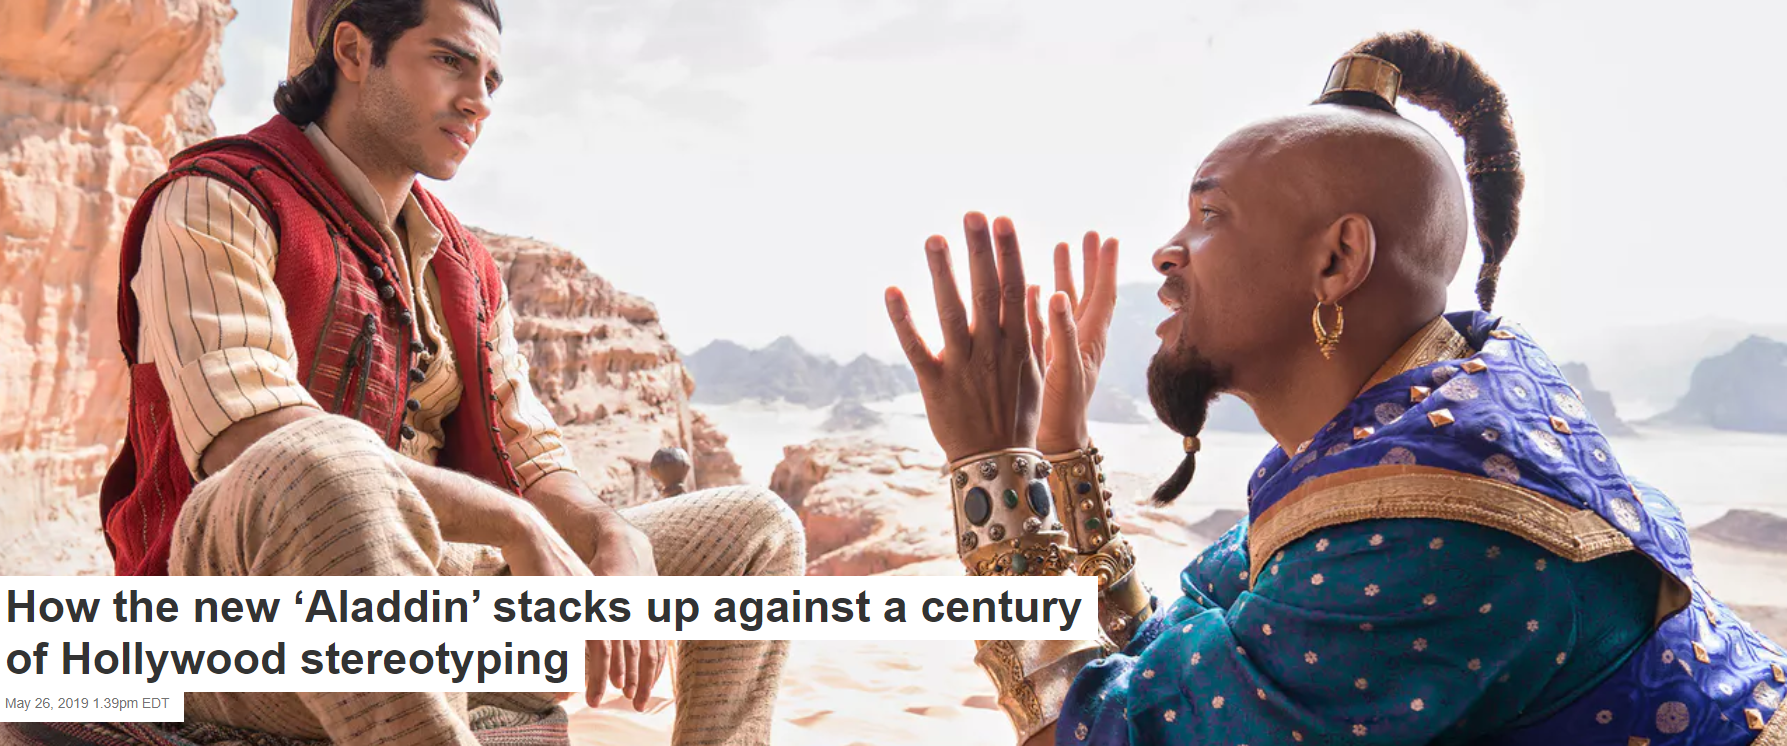 How the new ‘Aladdin’ stacks up against a century of Hollywood stereotyping